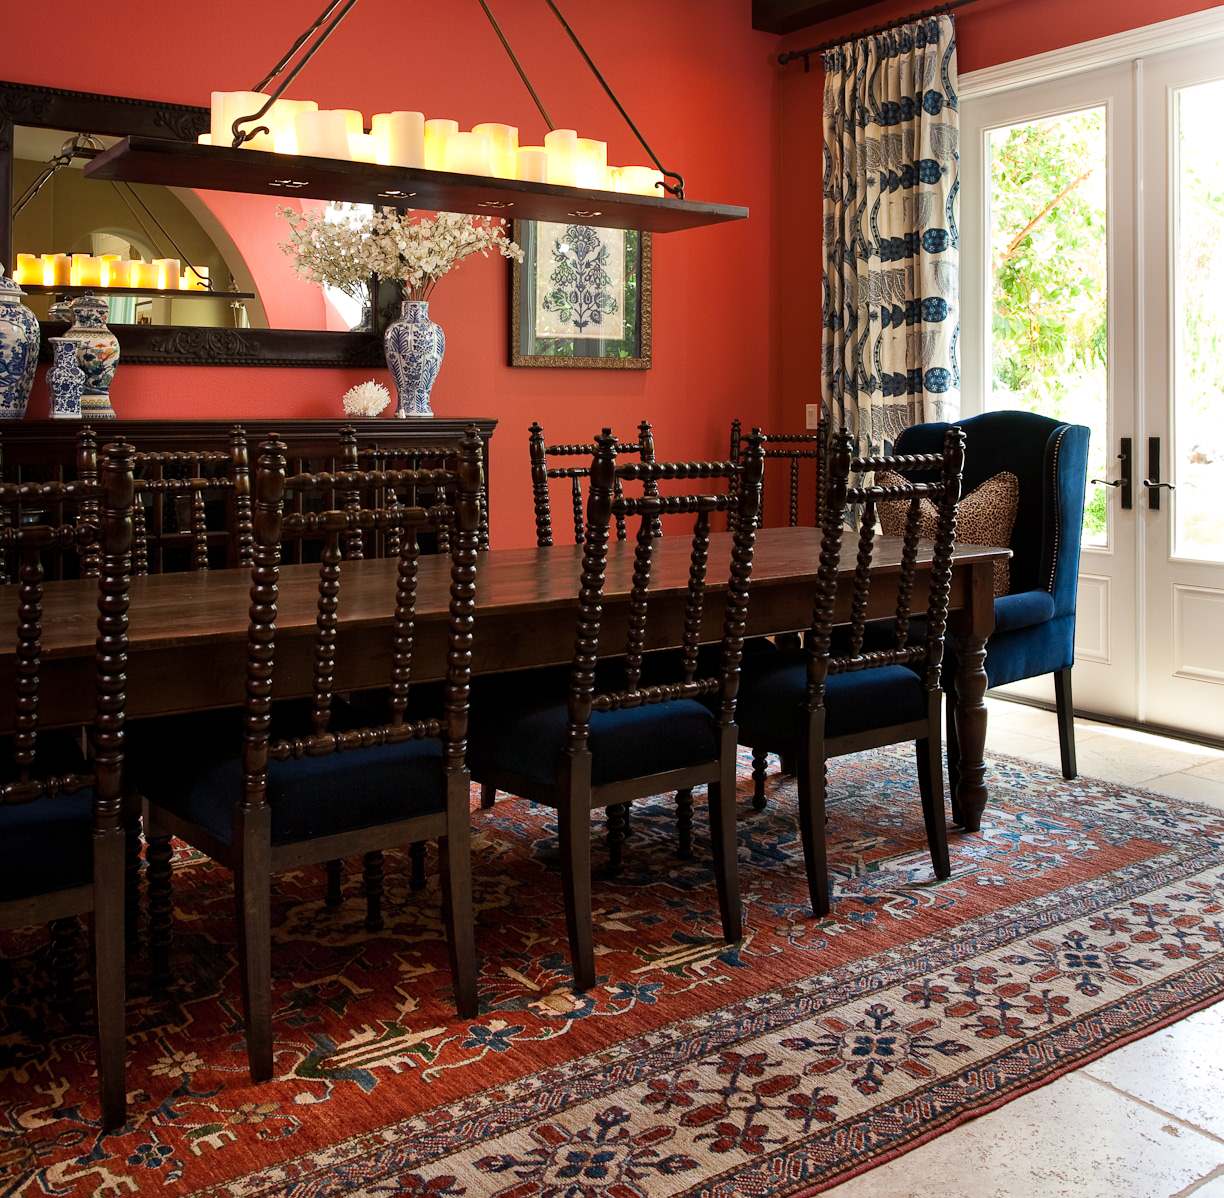 75 Beautiful Dining Room With Red Walls Pictures Ideas April 2021 Houzz